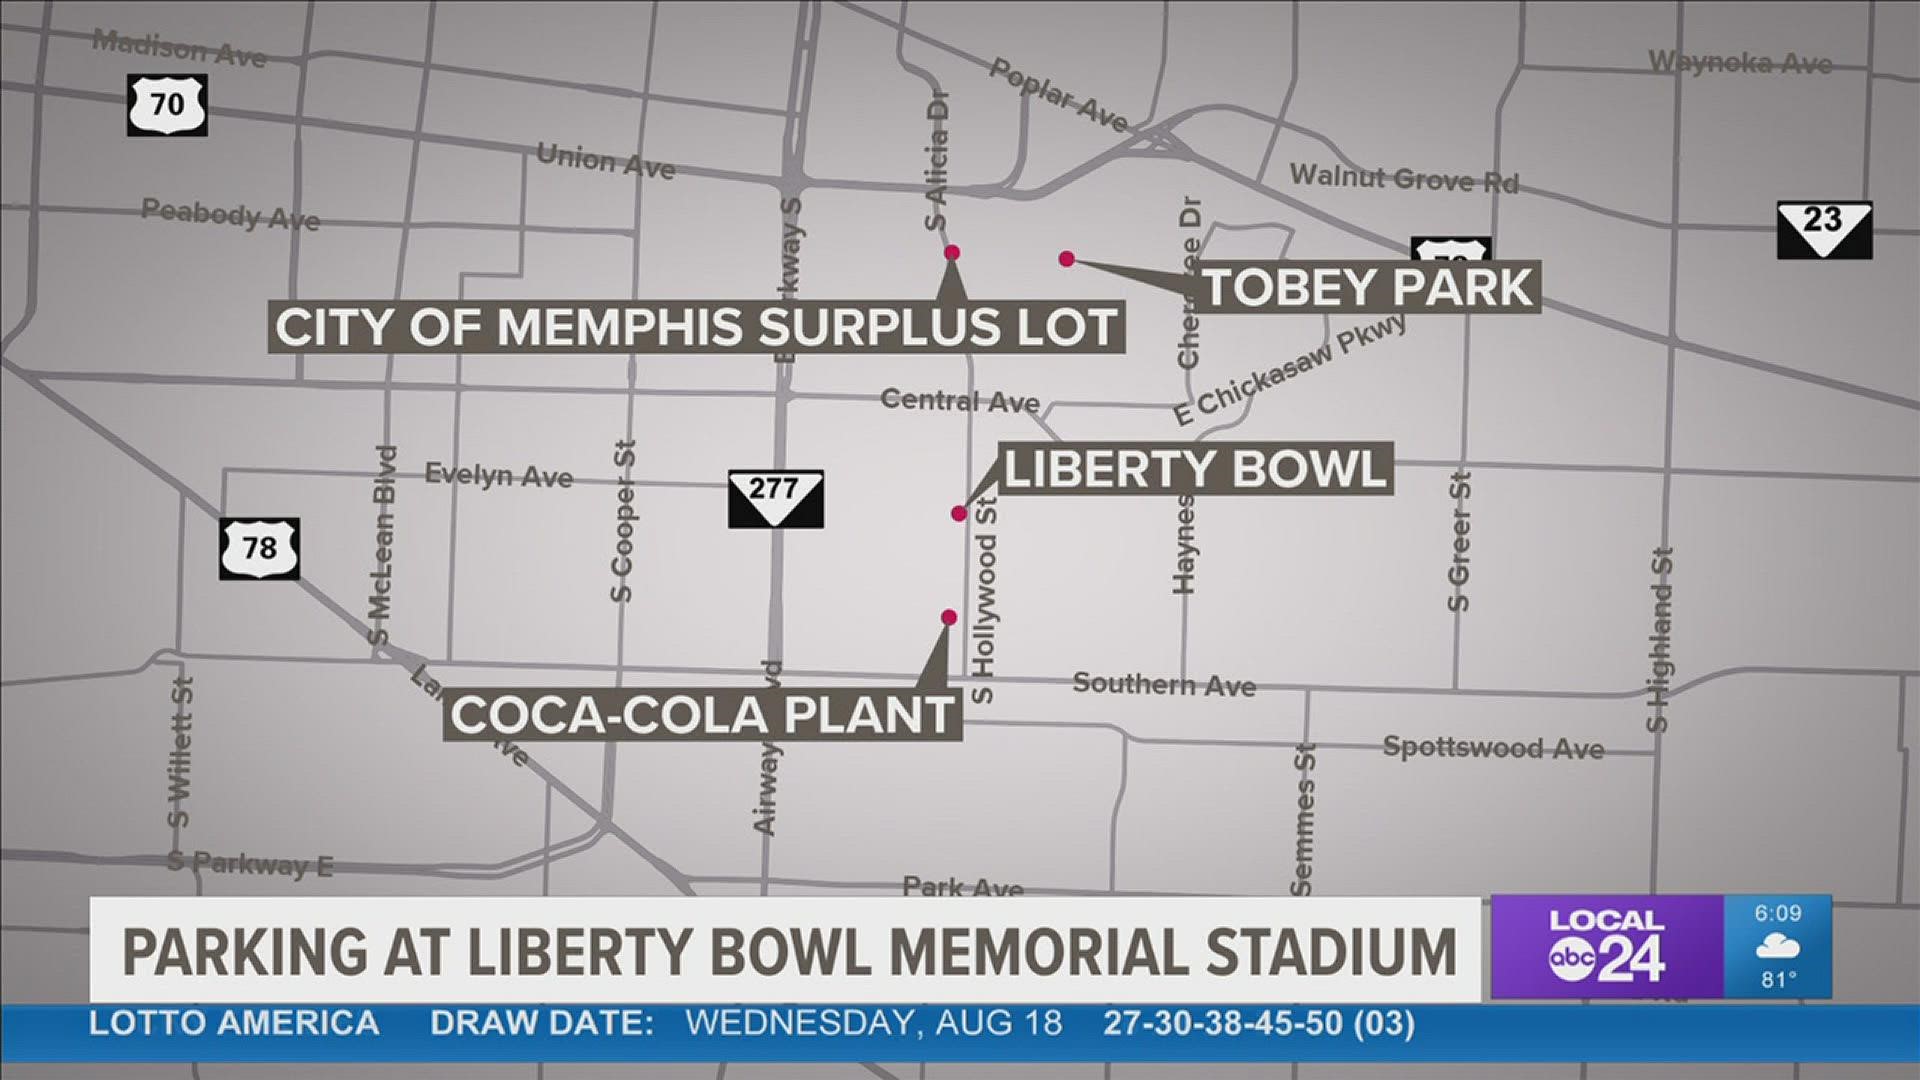 The City of Memphis released information on parking for football games this season at Liberty Bowl Memorial Stadium in Midtown.